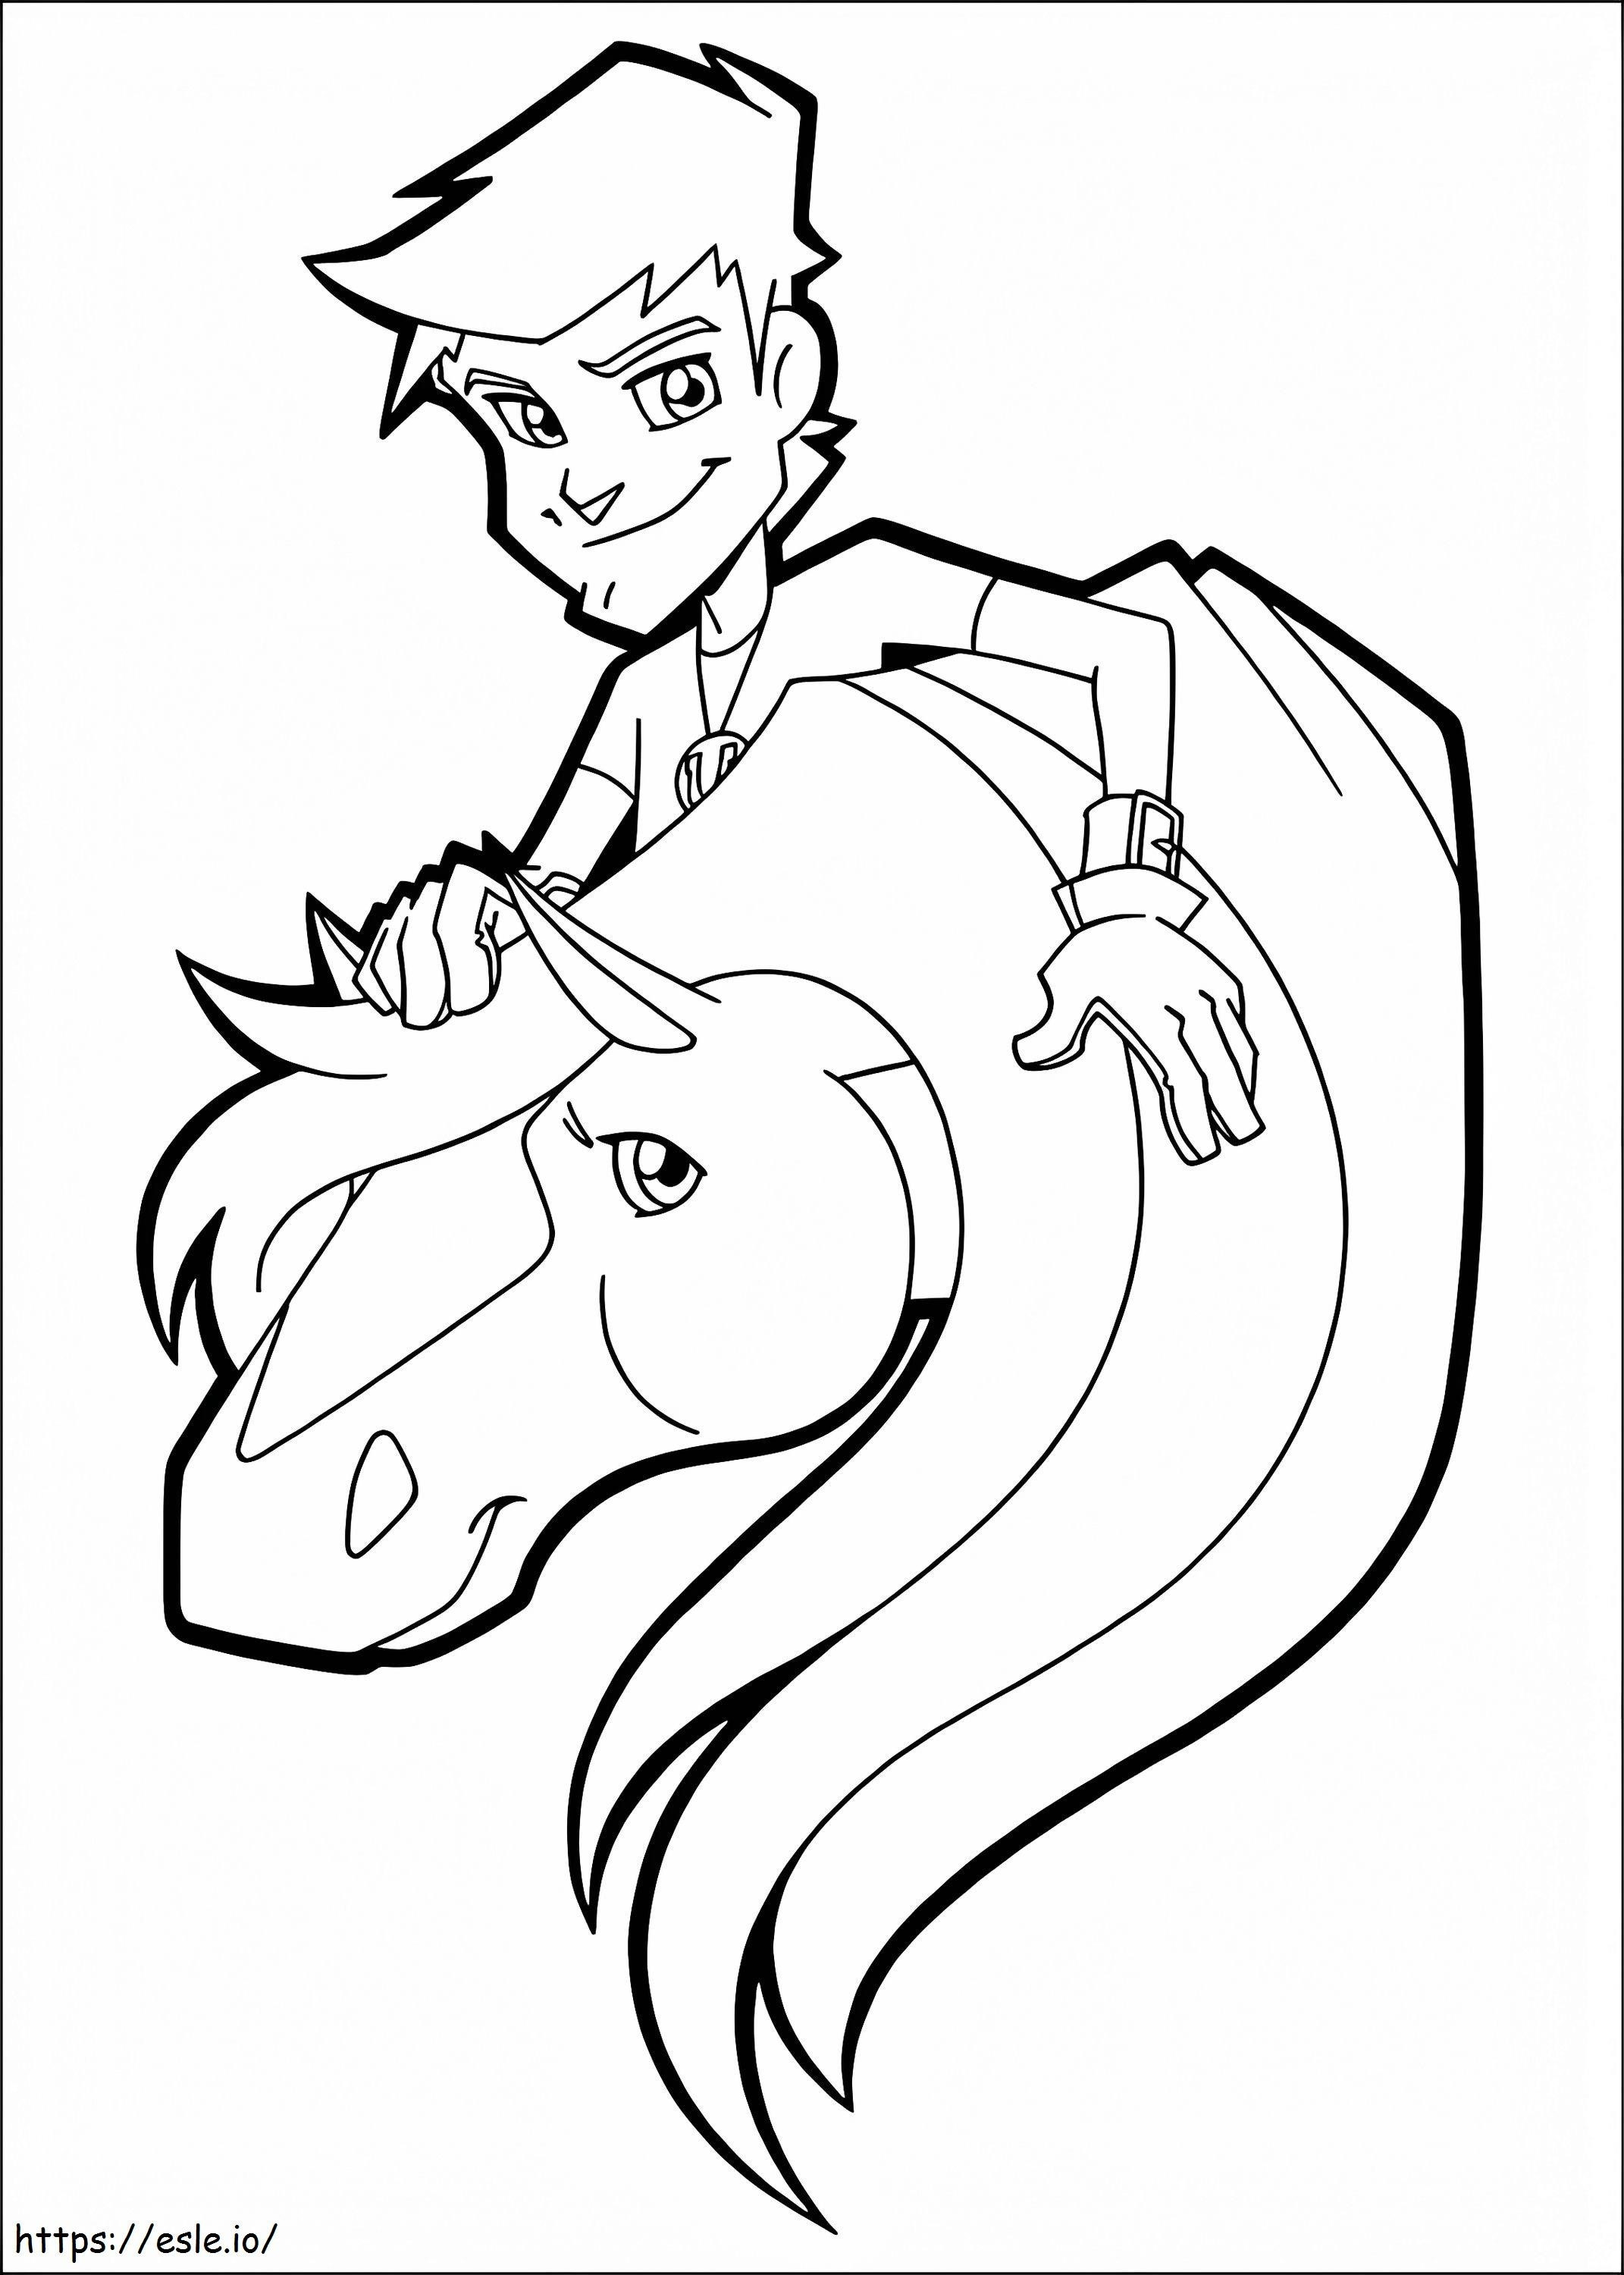 Horseland 8 coloring page